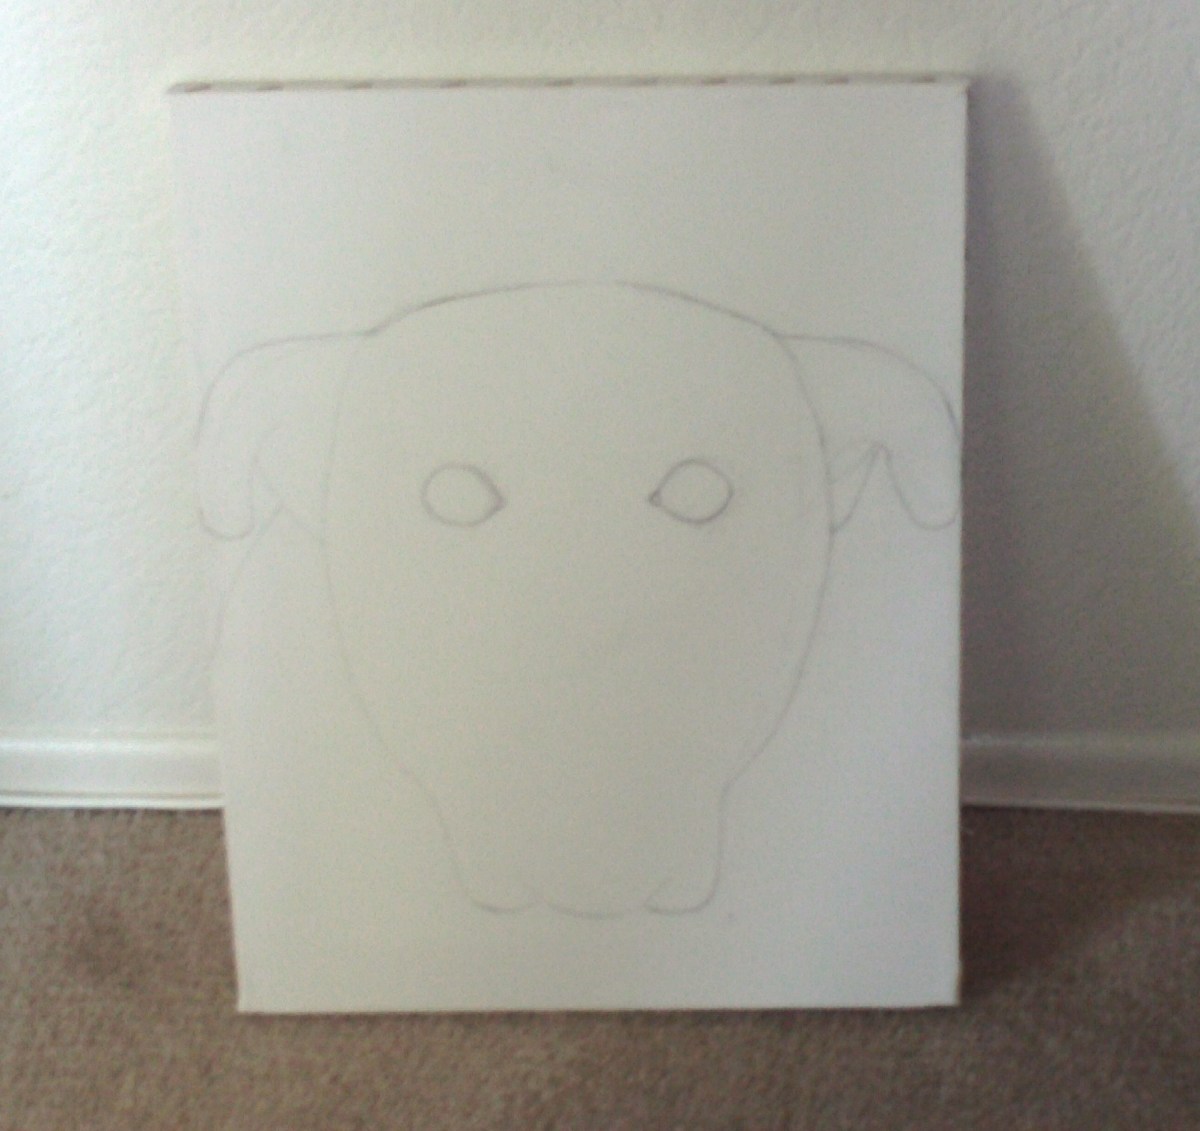 Here I have sketched out the outline of Buster's face.